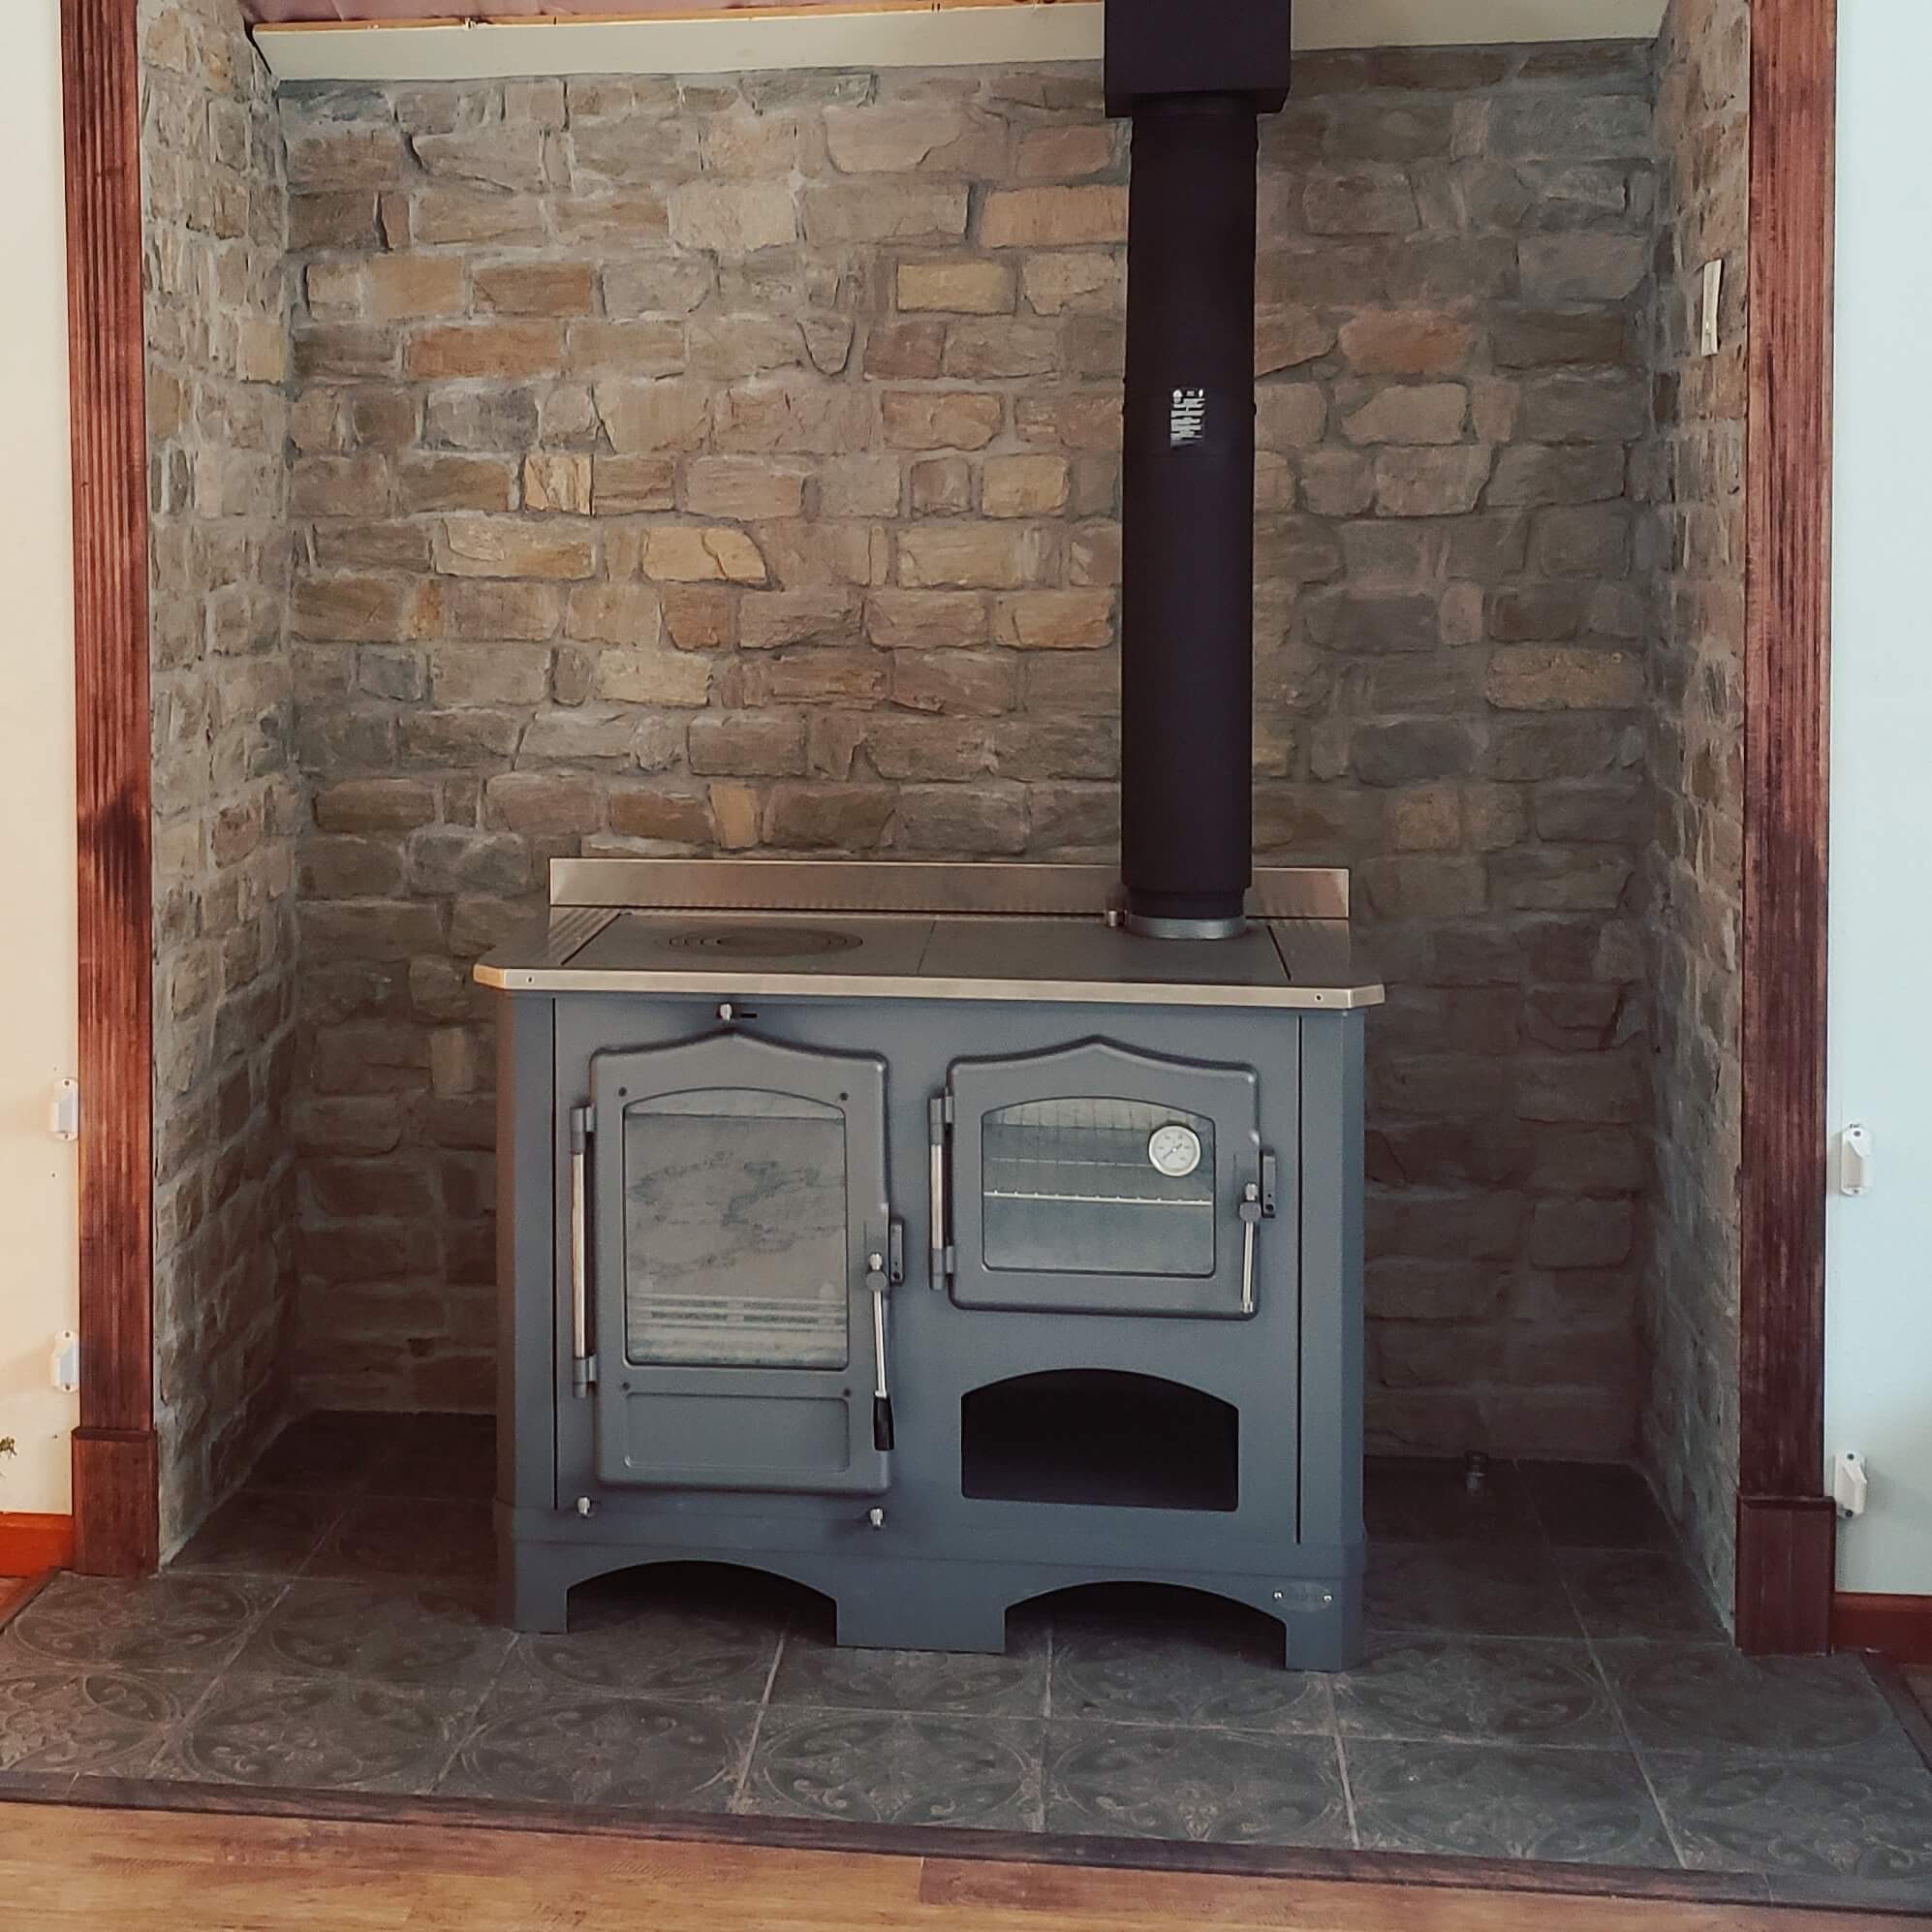 Finding & Using the Perfect Wood Burning Cook Stove – Real World